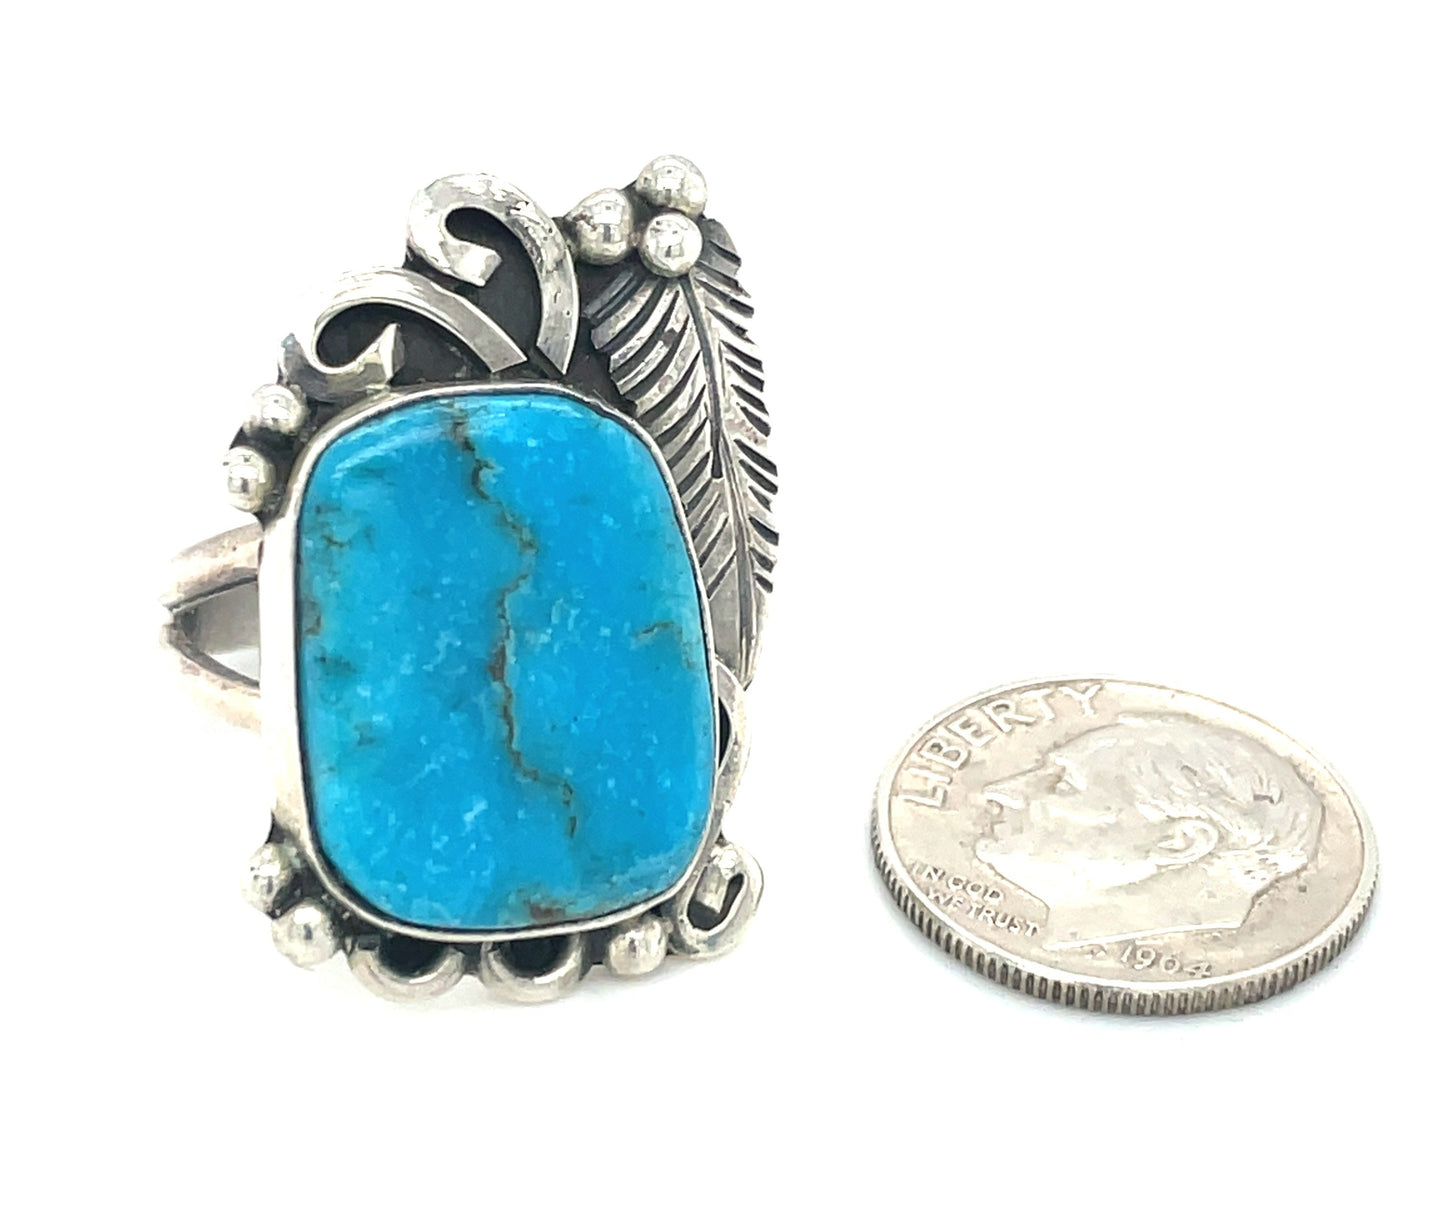 Vintage Southwestern Sterling Silver and Turquoise Ring Size 7 1/4